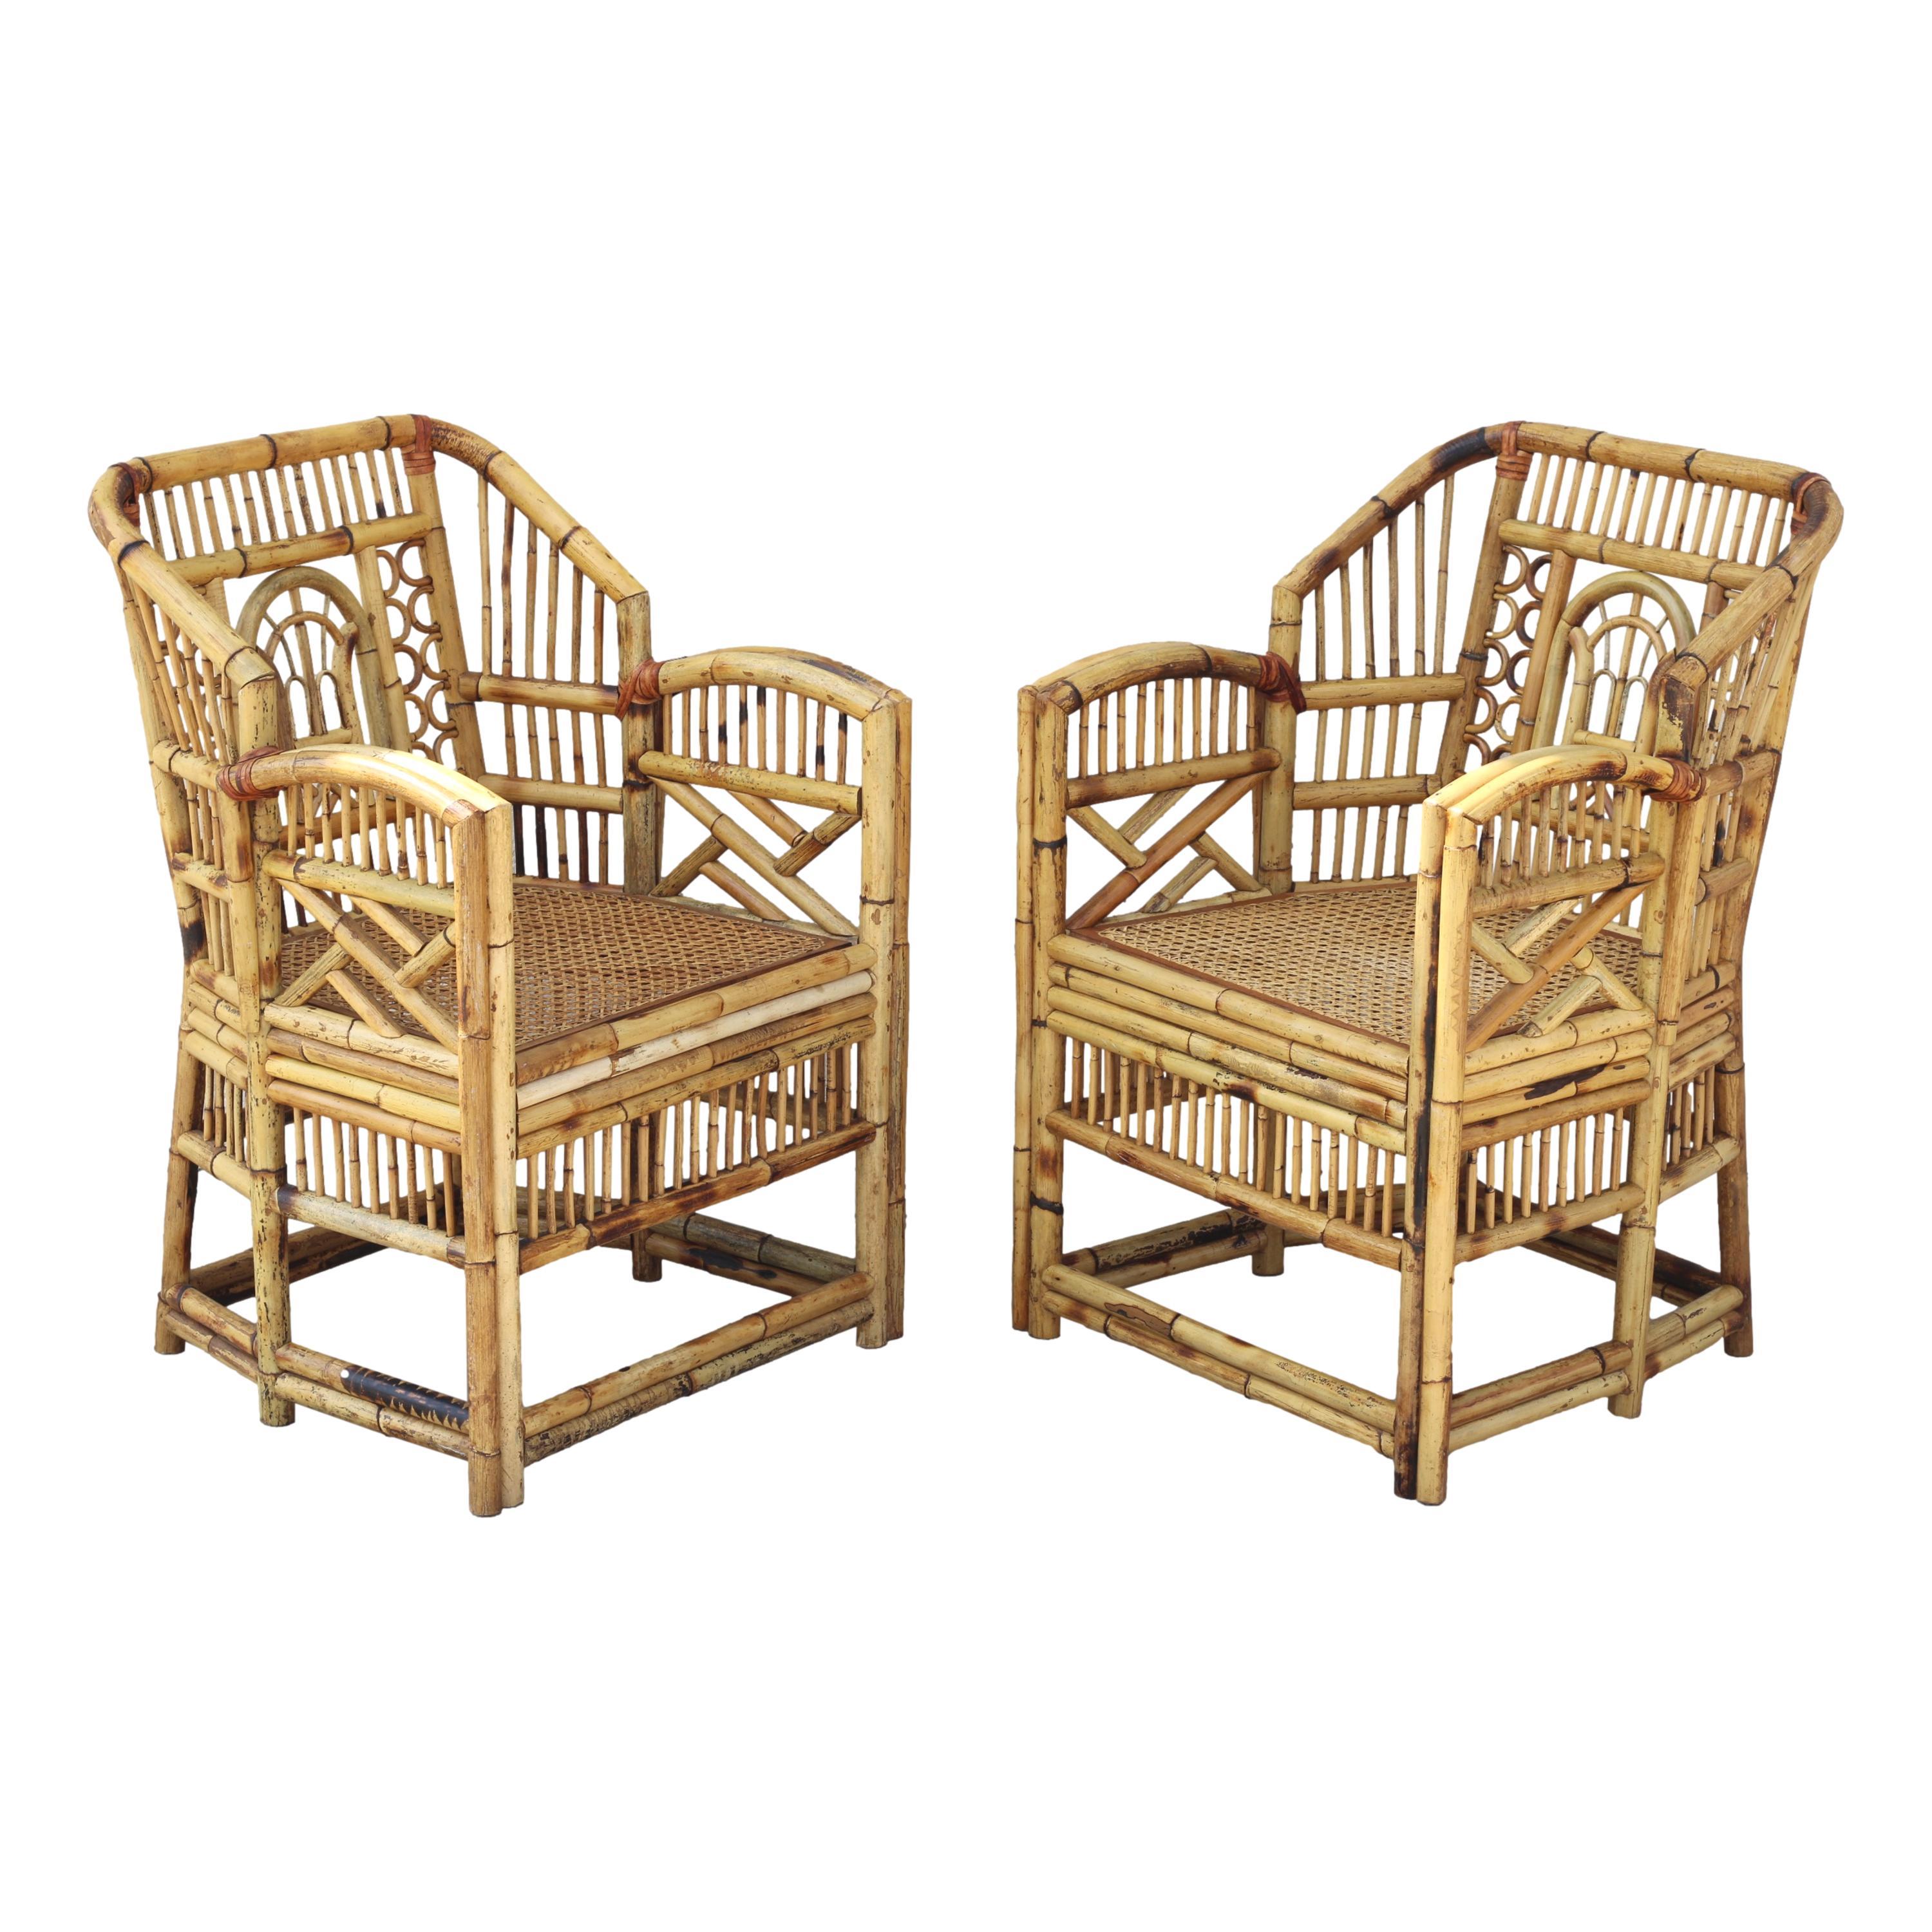 Fabulous set of four vintage Brighton style bamboo dining armchairs, circa 1970.  These handcrafted Chinese Chippendale chairs feature caned-bottom seats, bamboo open fretwork, and a burnt bamboo finish with a lovely distressed aged patina. Seat